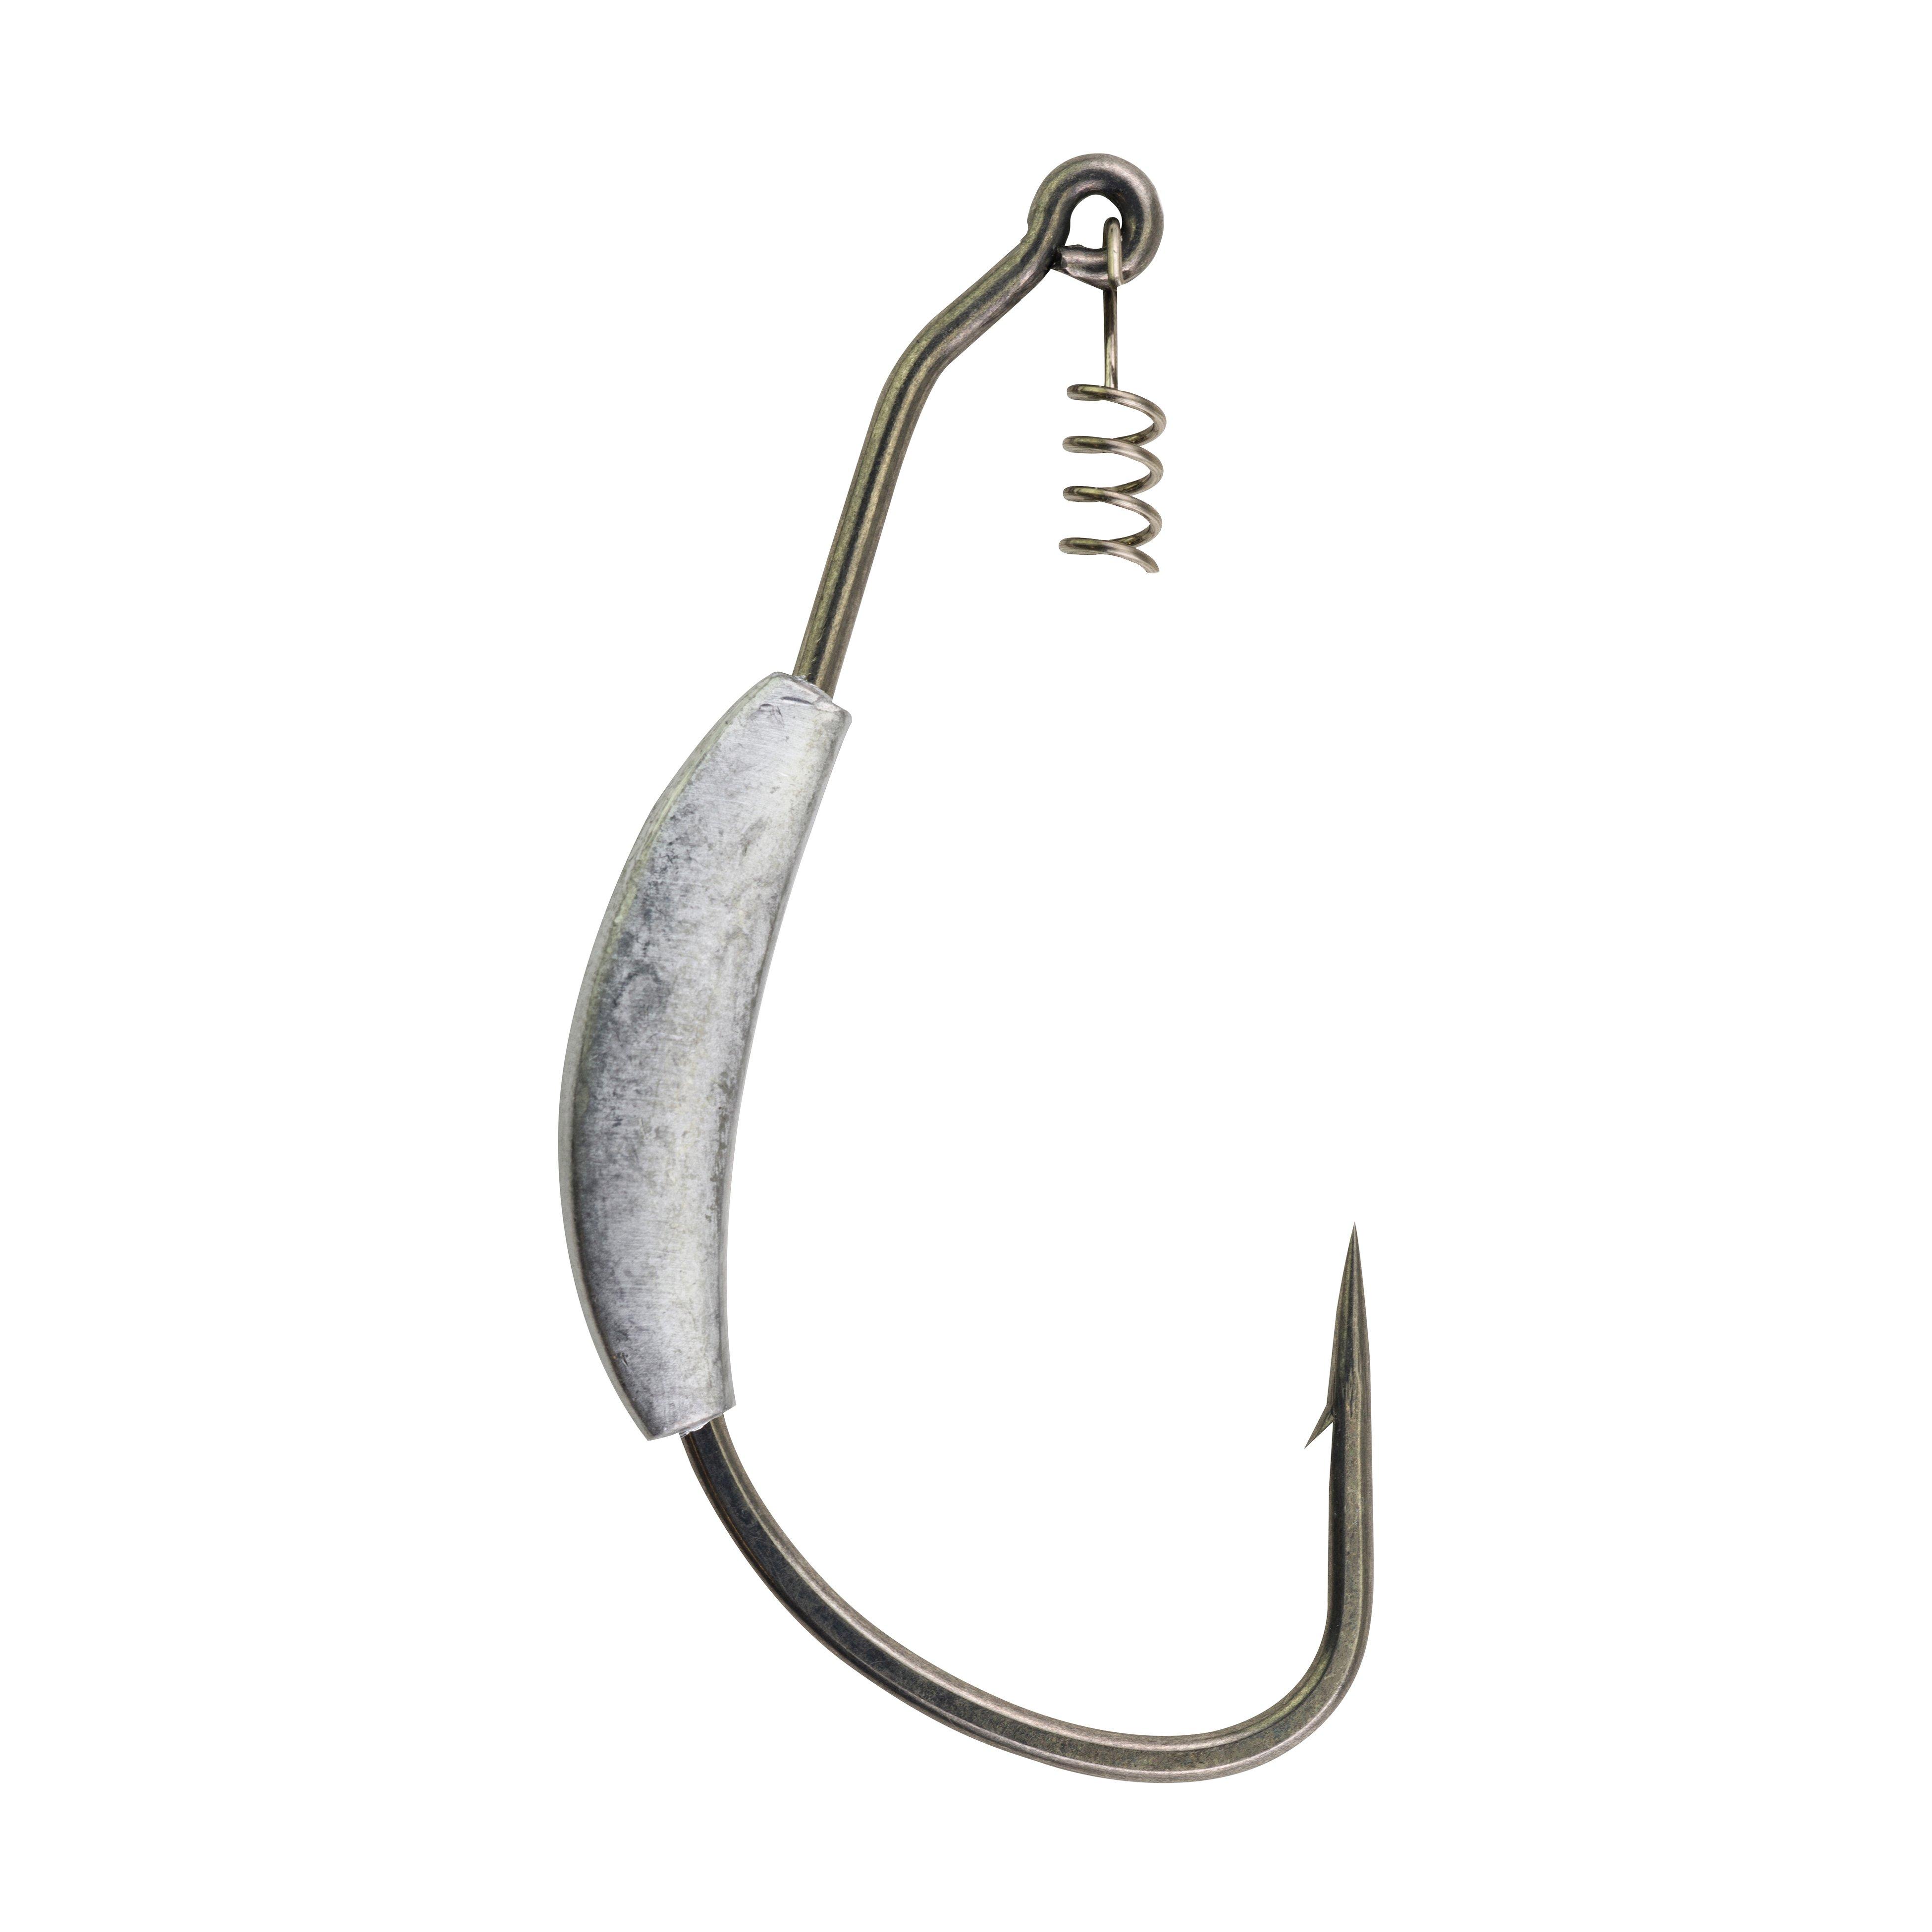 HDWWS Heavy Duty Weighted Willow Swimbait Hook